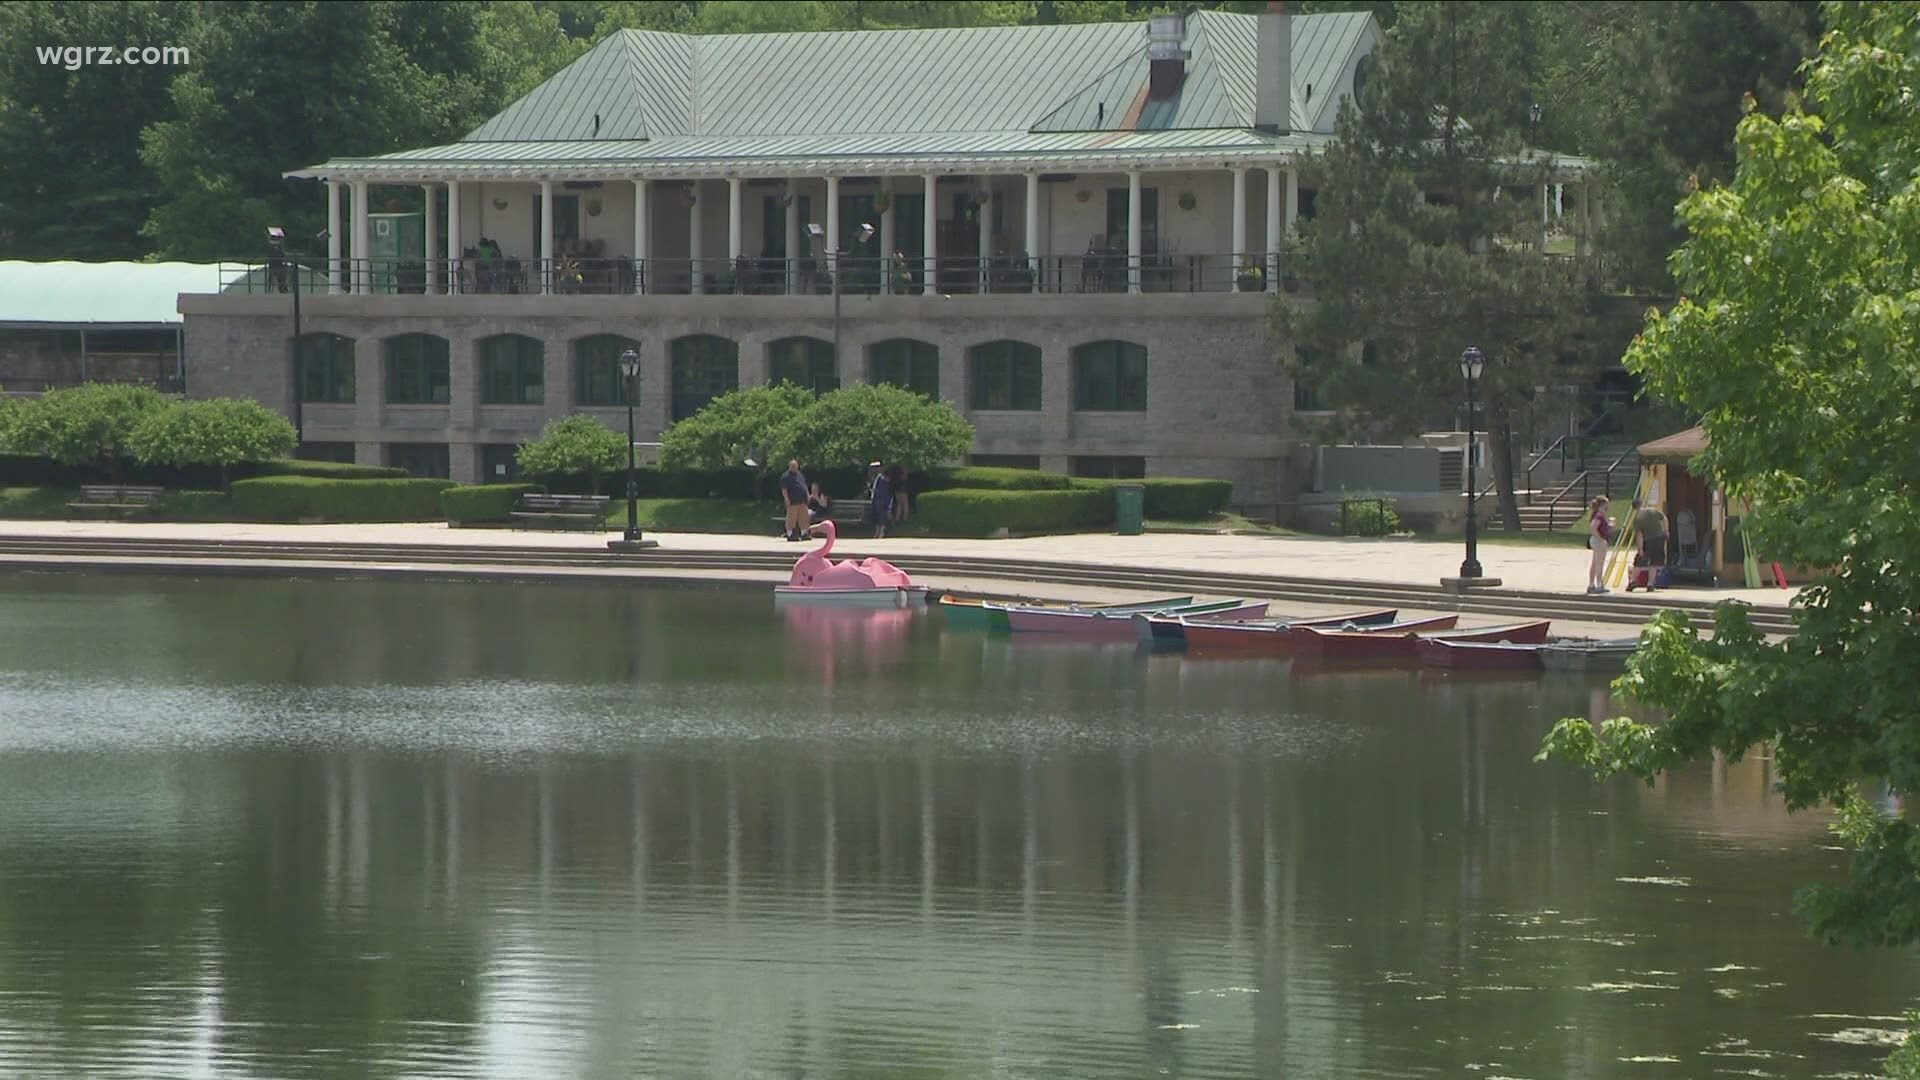 The rowboats will return first, followed by the popular flamingo paddle boats.